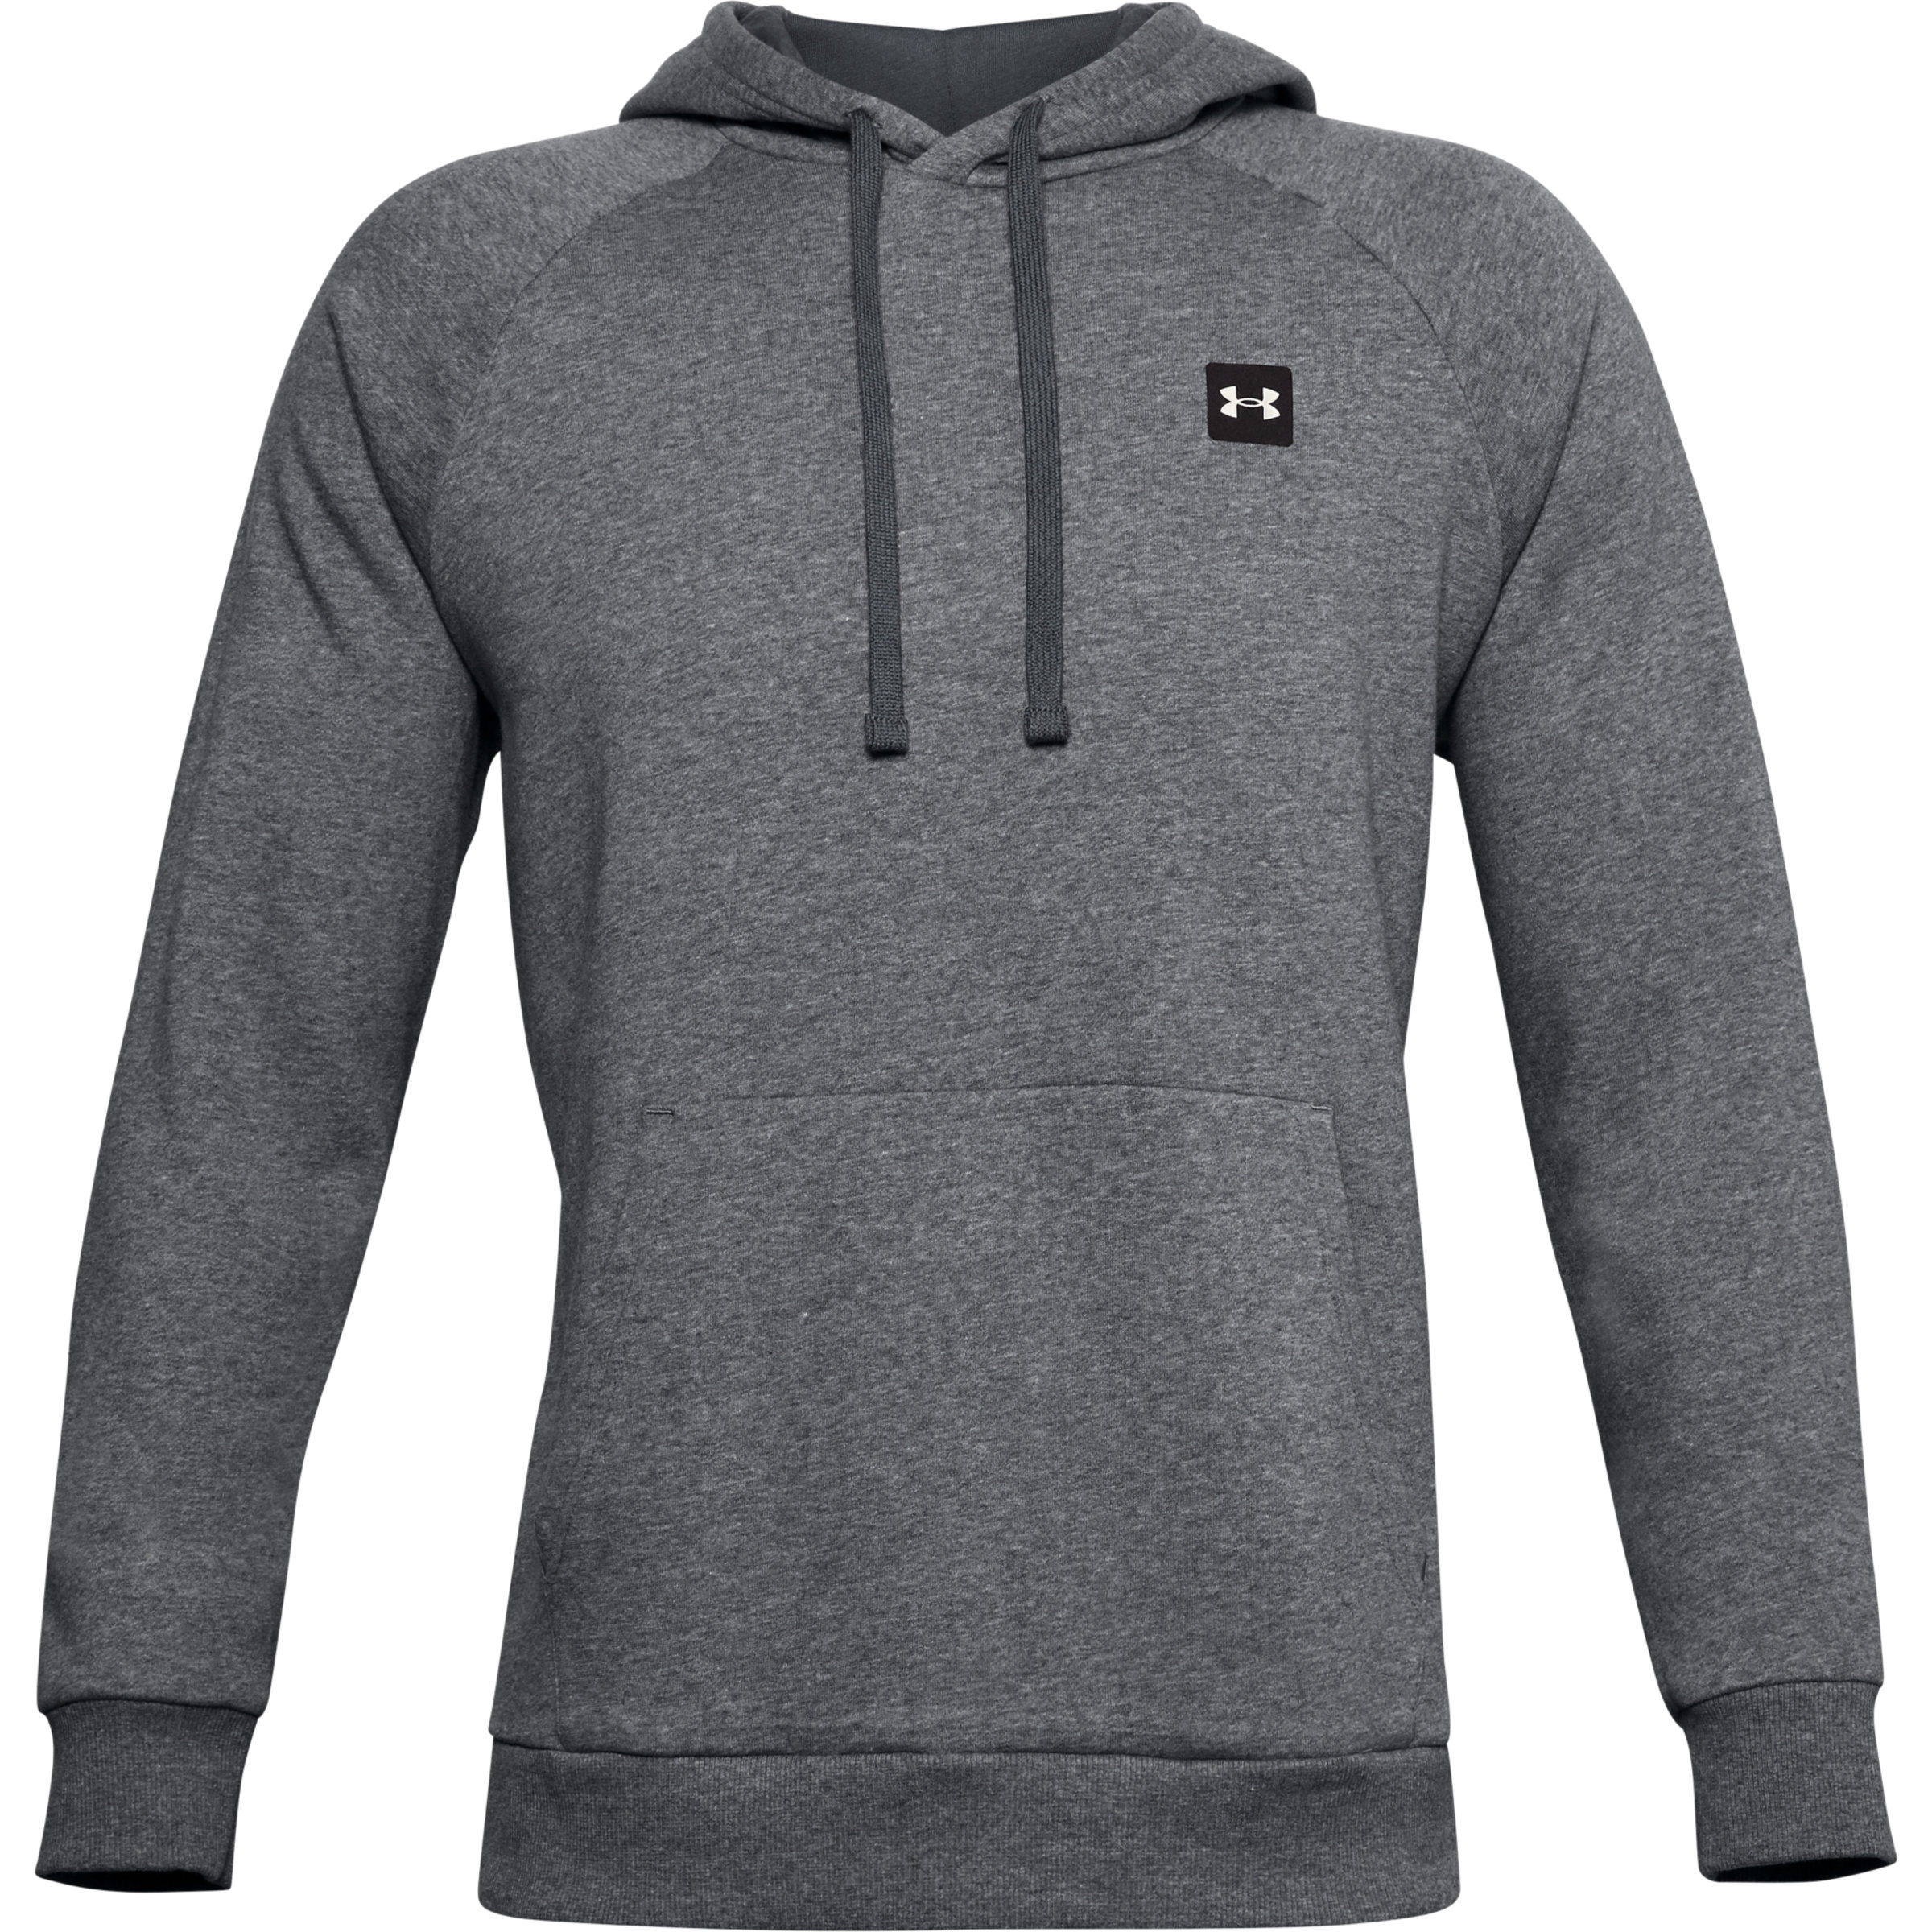 Under Armour Rival Fleece Hoodie Pullover Gray Heather